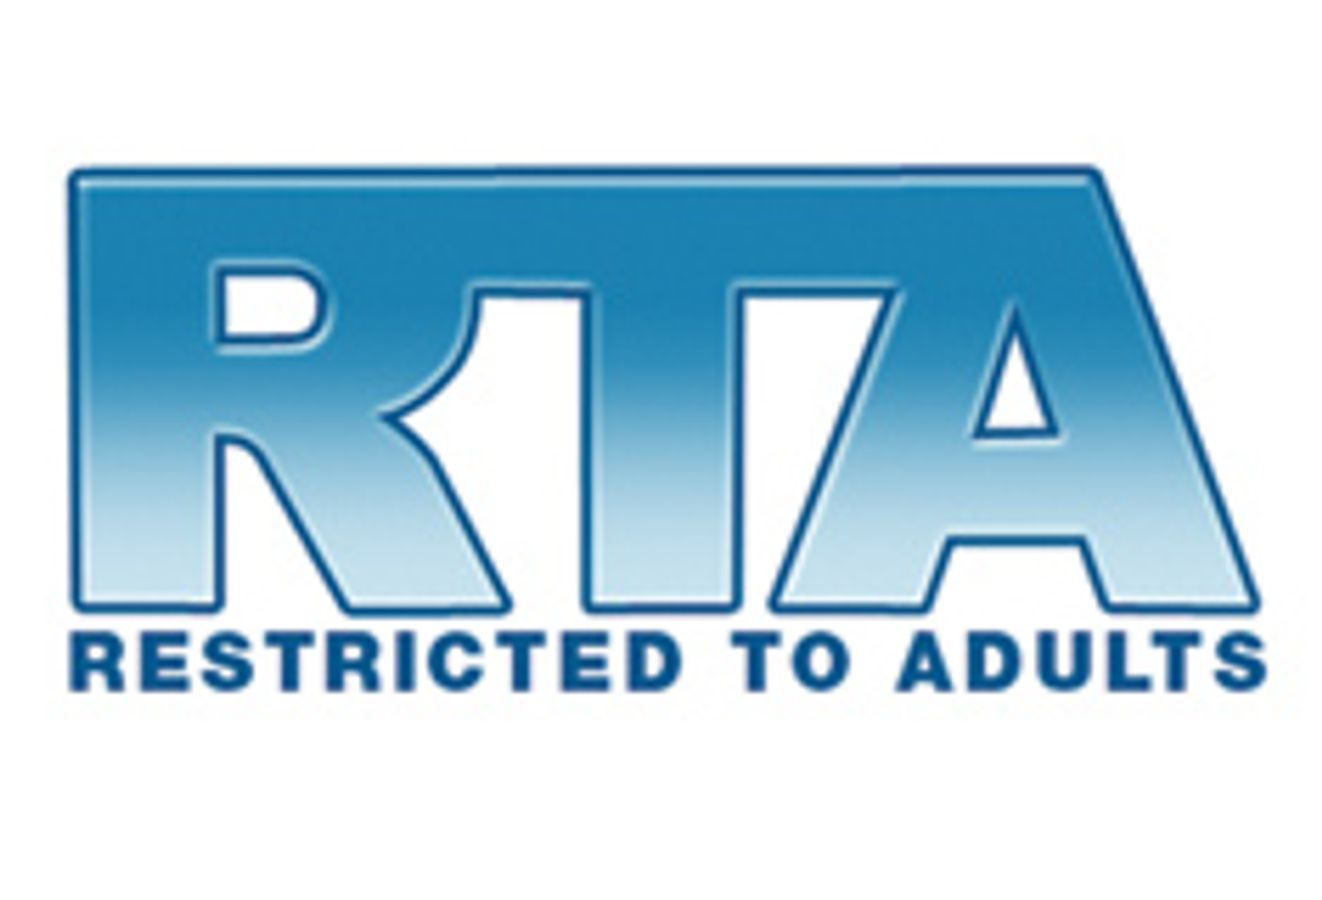 Restricted to Adults - RTA Website Label